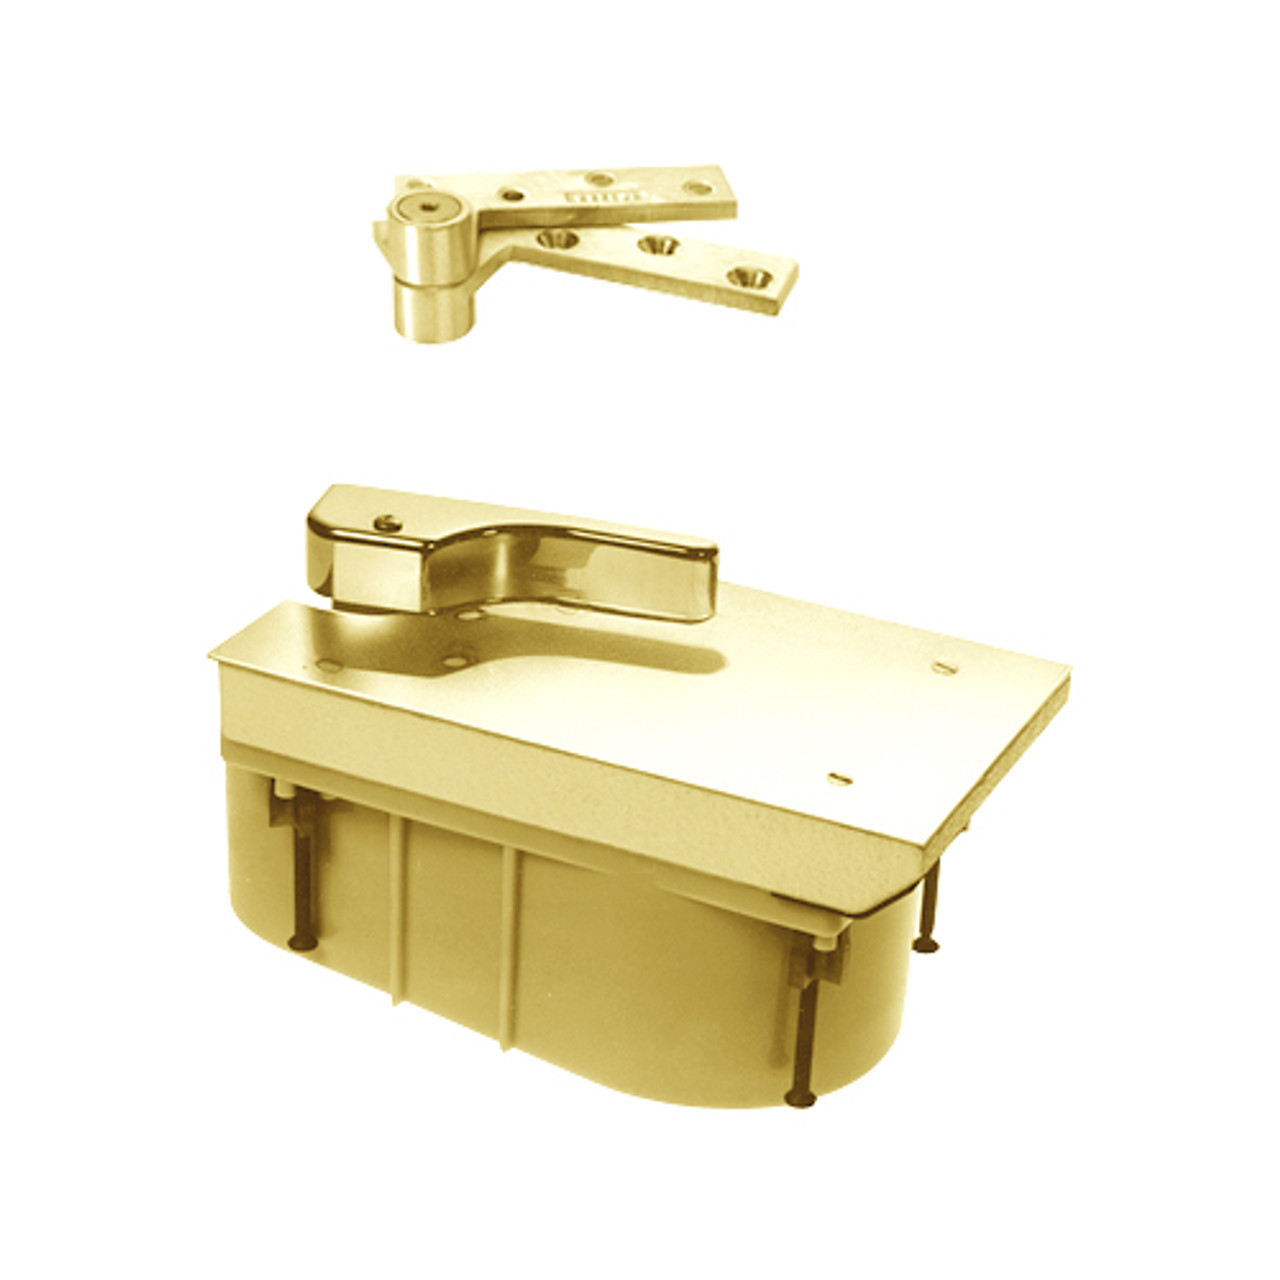 Q27-105S-LFP-LH-605 Rixson 27 Series Heavy Duty Quick Install Offset Hung Floor Closer in Bright Brass Finish